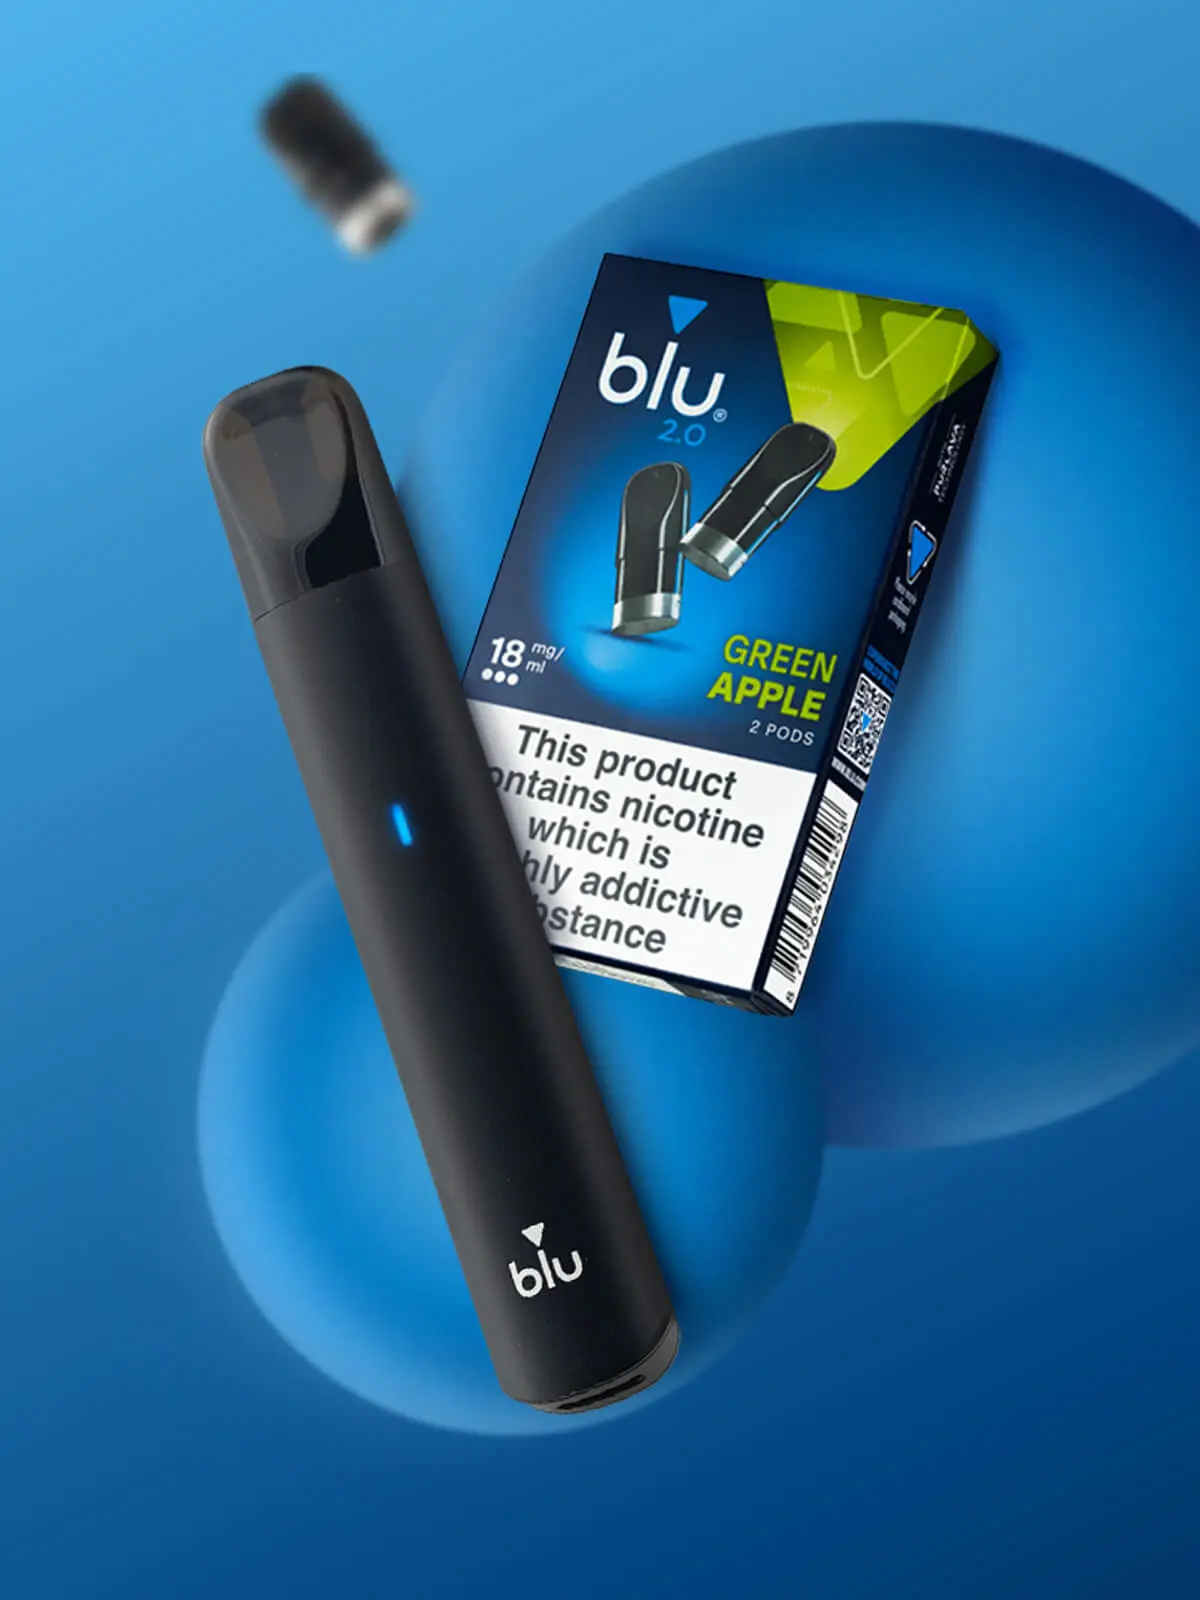 blu 2.0 device and a pack of blu 2.0 Green Apple pods floating in front of a blue background